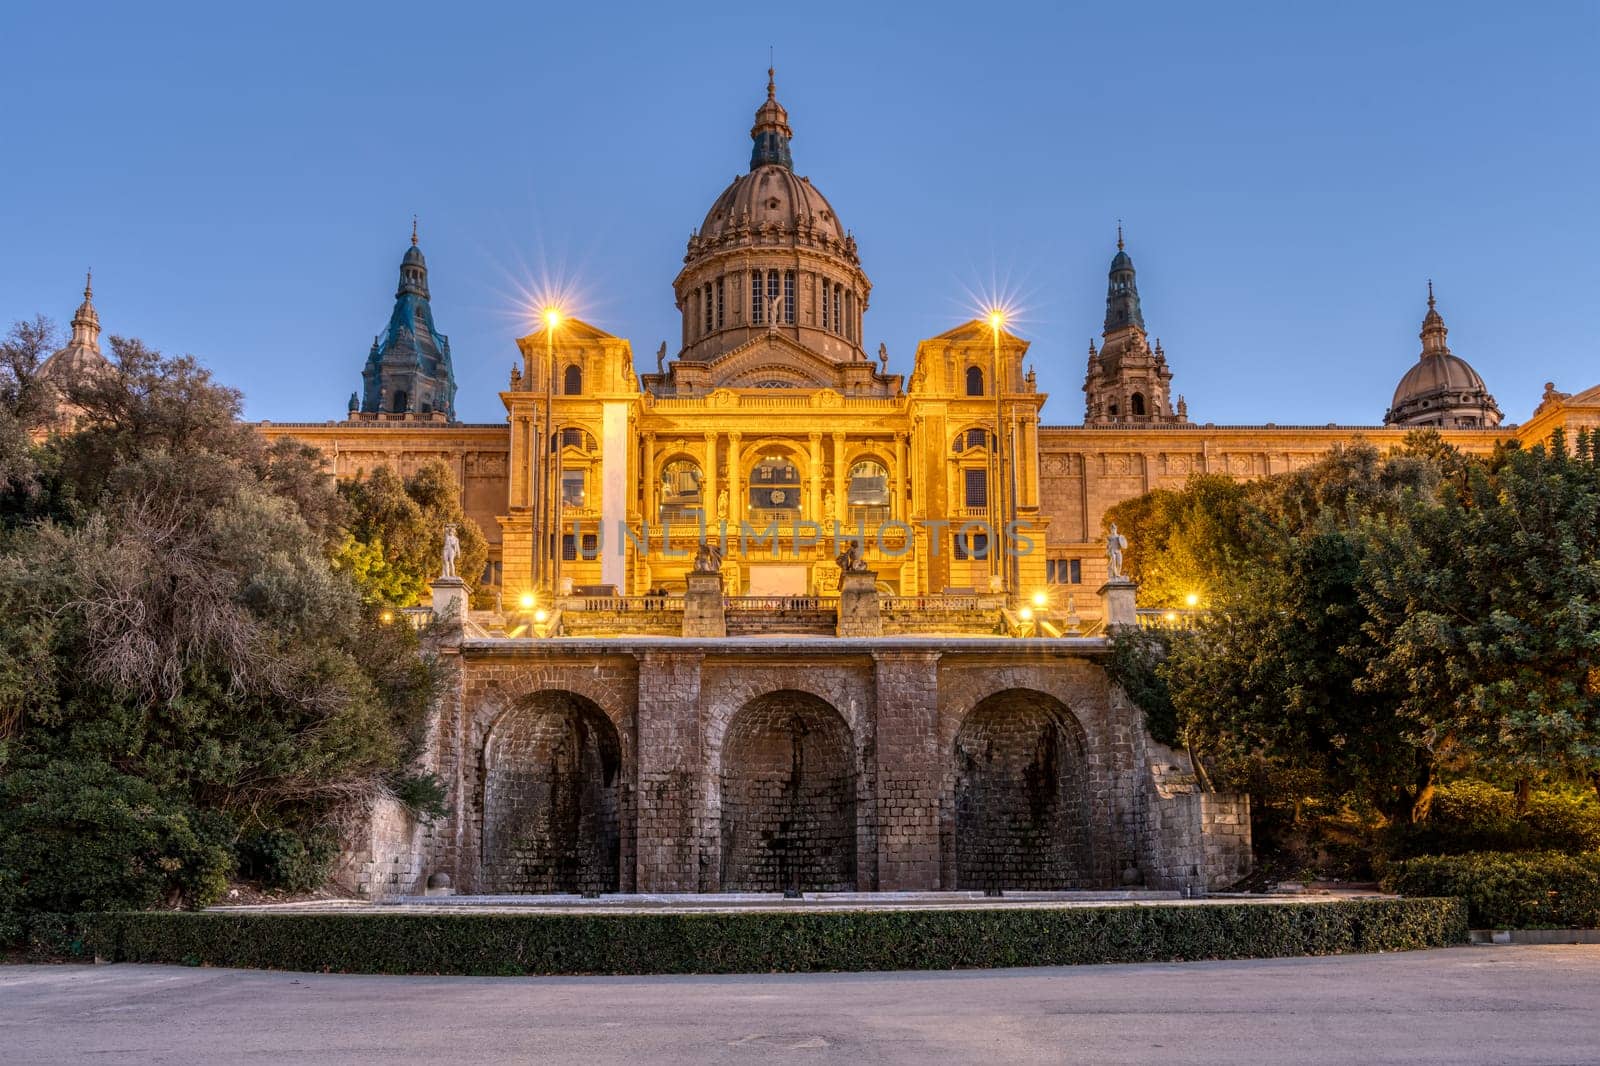 The Montjuic National Palace in Barcelona by elxeneize